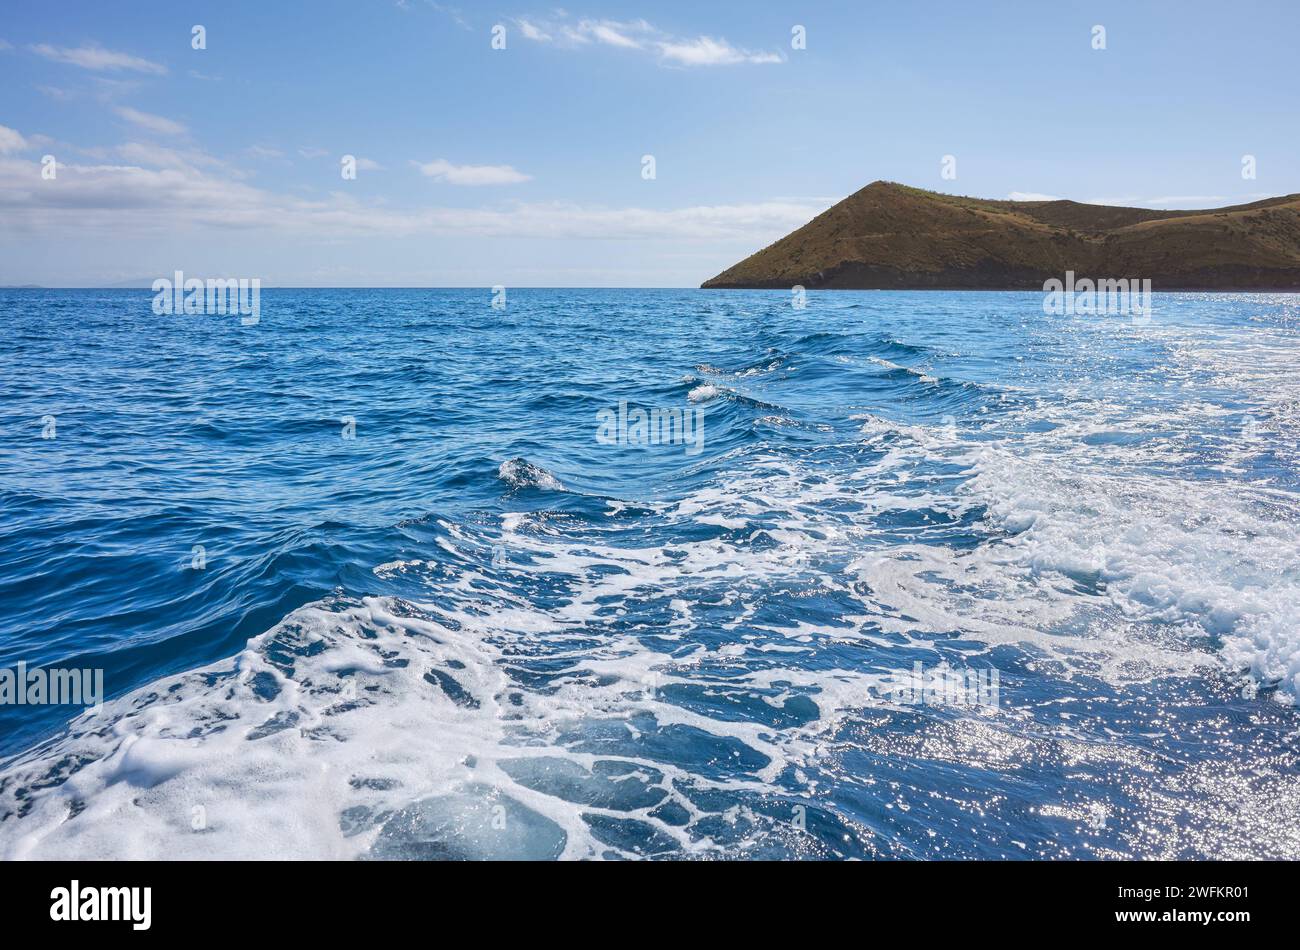 Pacific Ocean with an uninhabited island in the distance, Galapagos National Park, Ecuador. Stock Photo